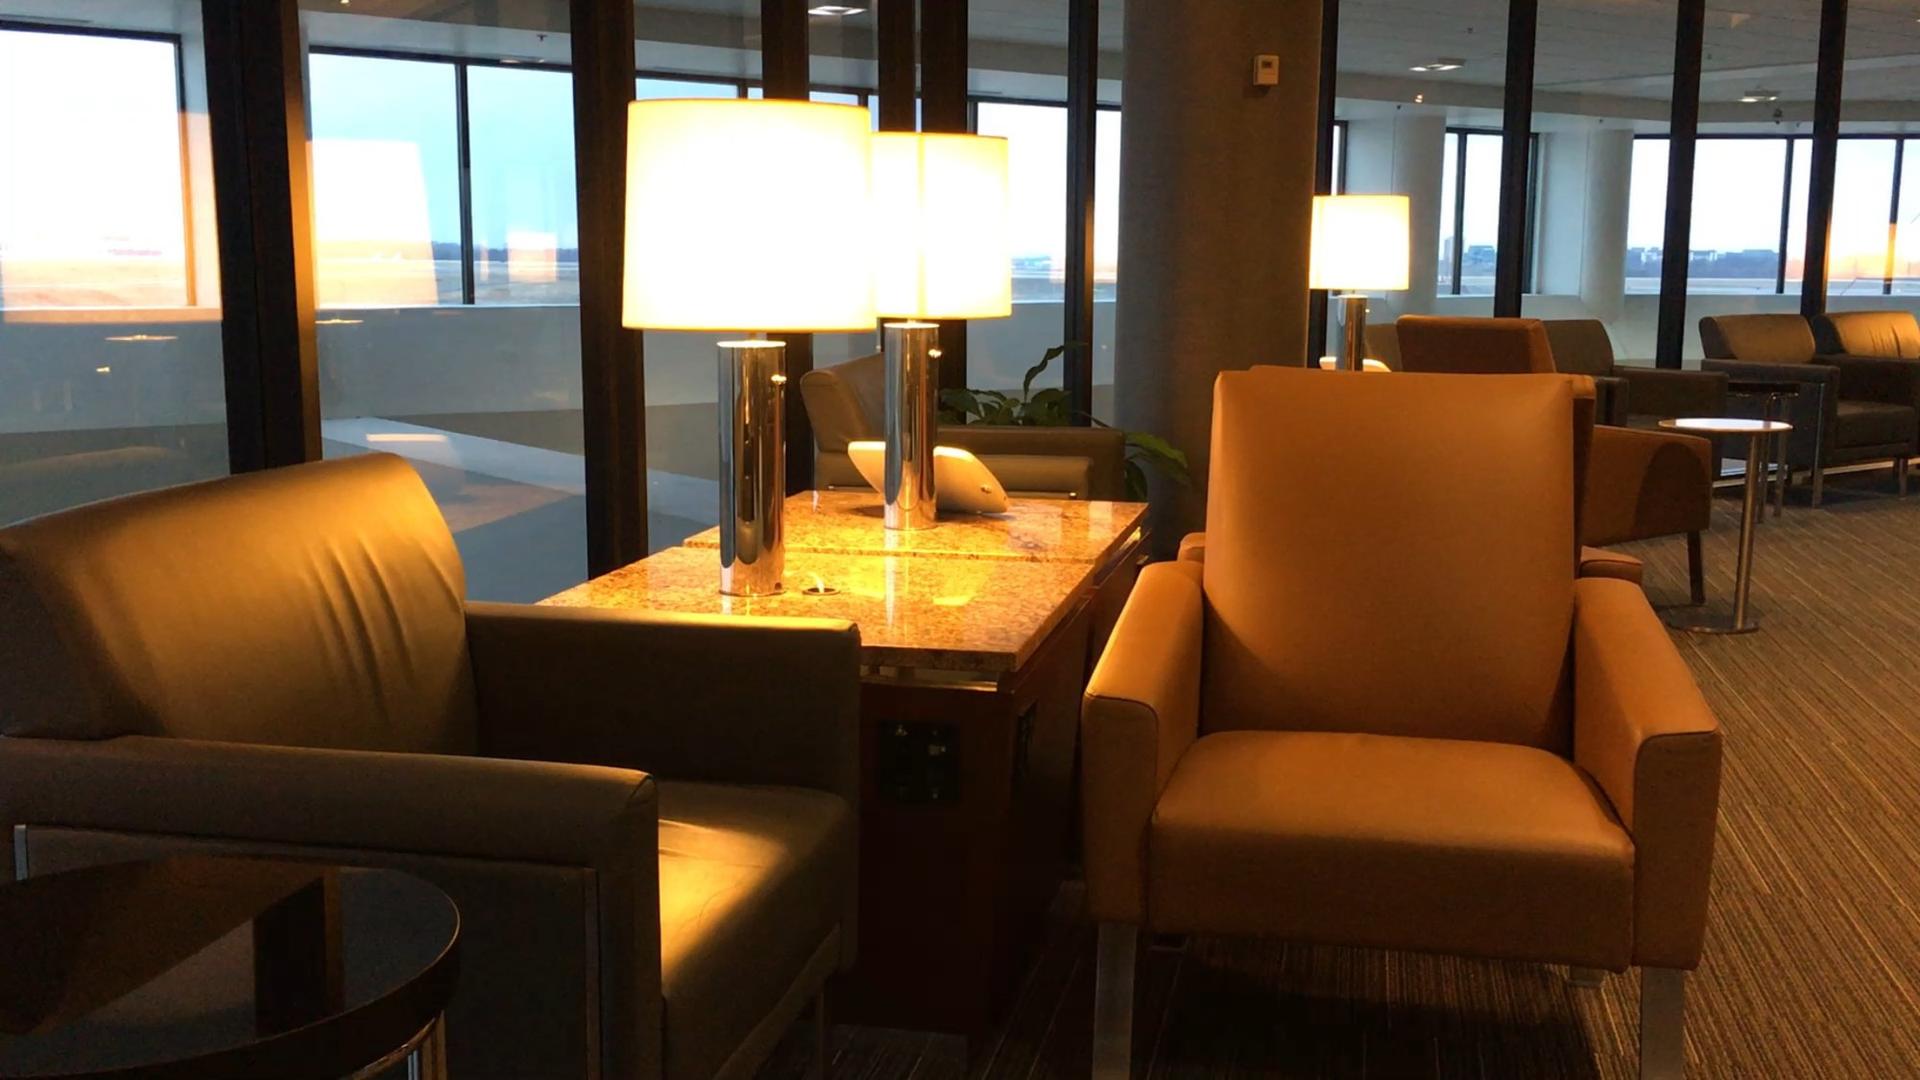 American Airlines Admirals Club image 5 of 16